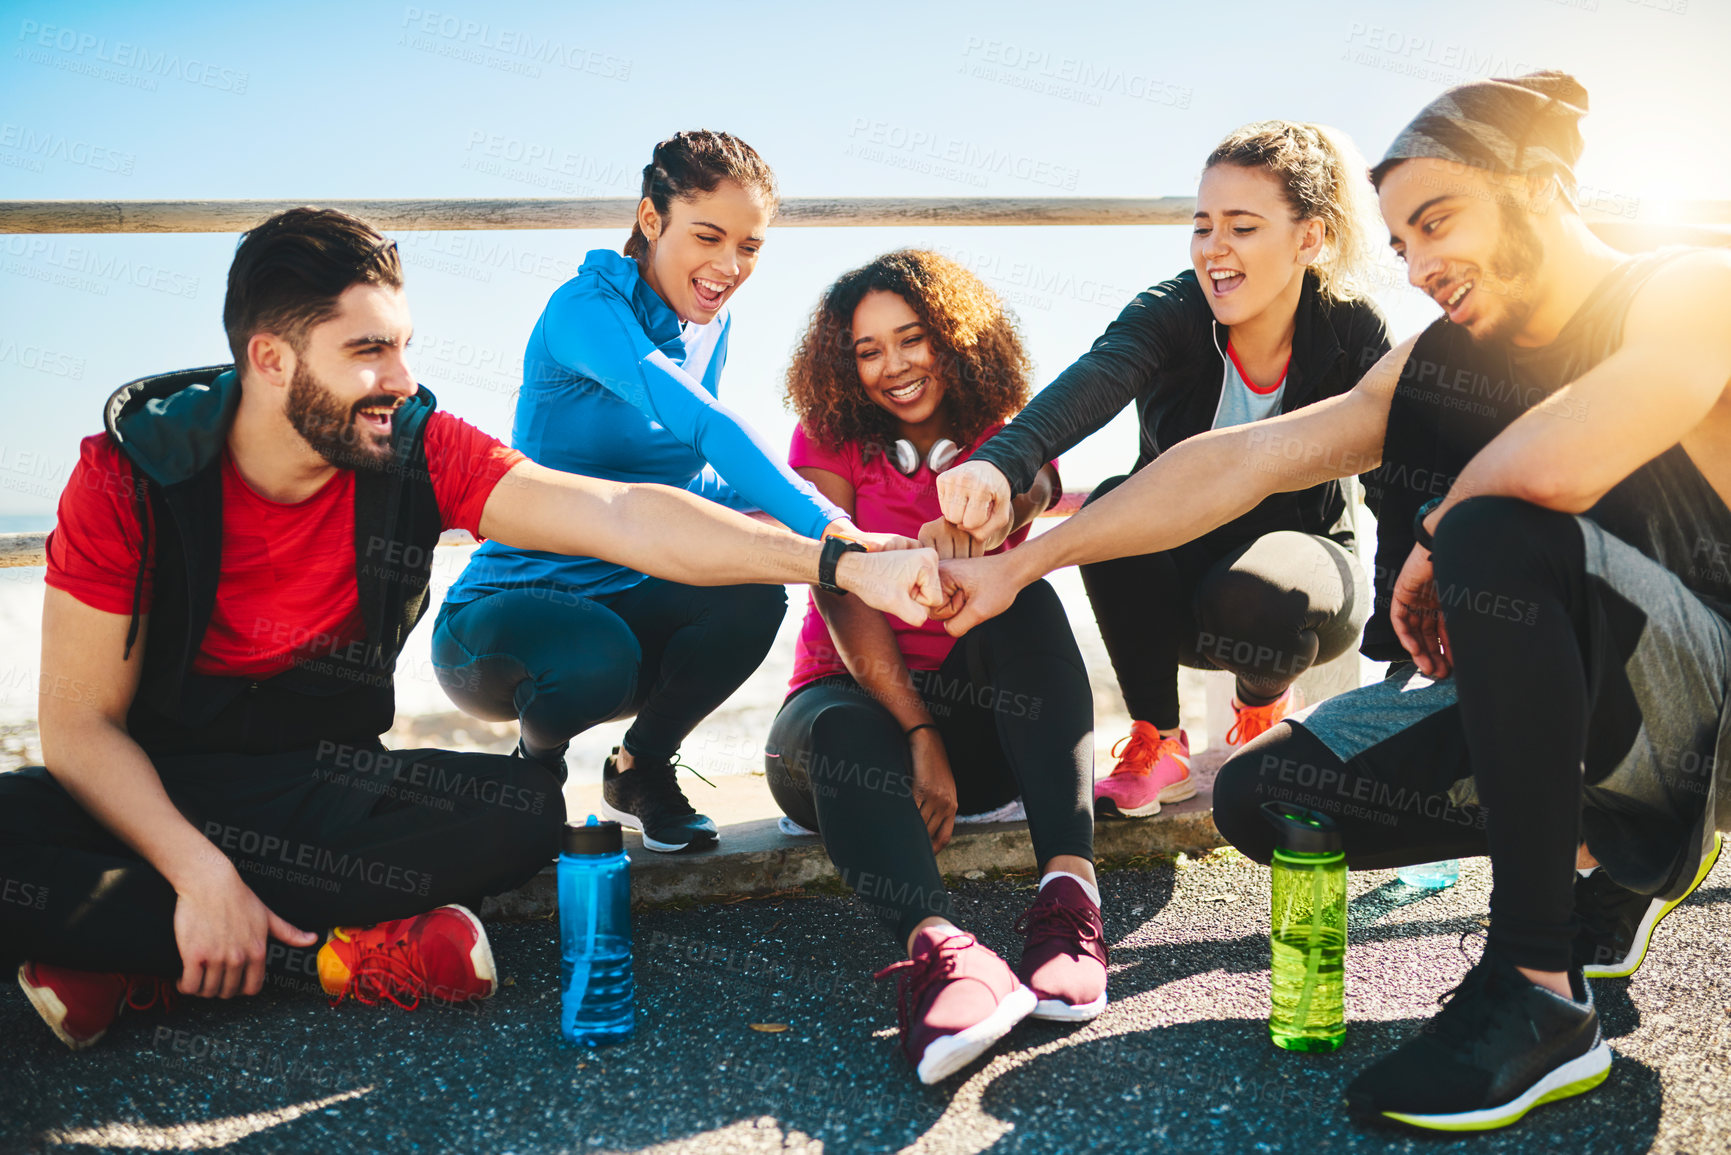 Buy stock photo Shot of a group of young cheerful friends forming a huddle after a fitness exercise outside during the day